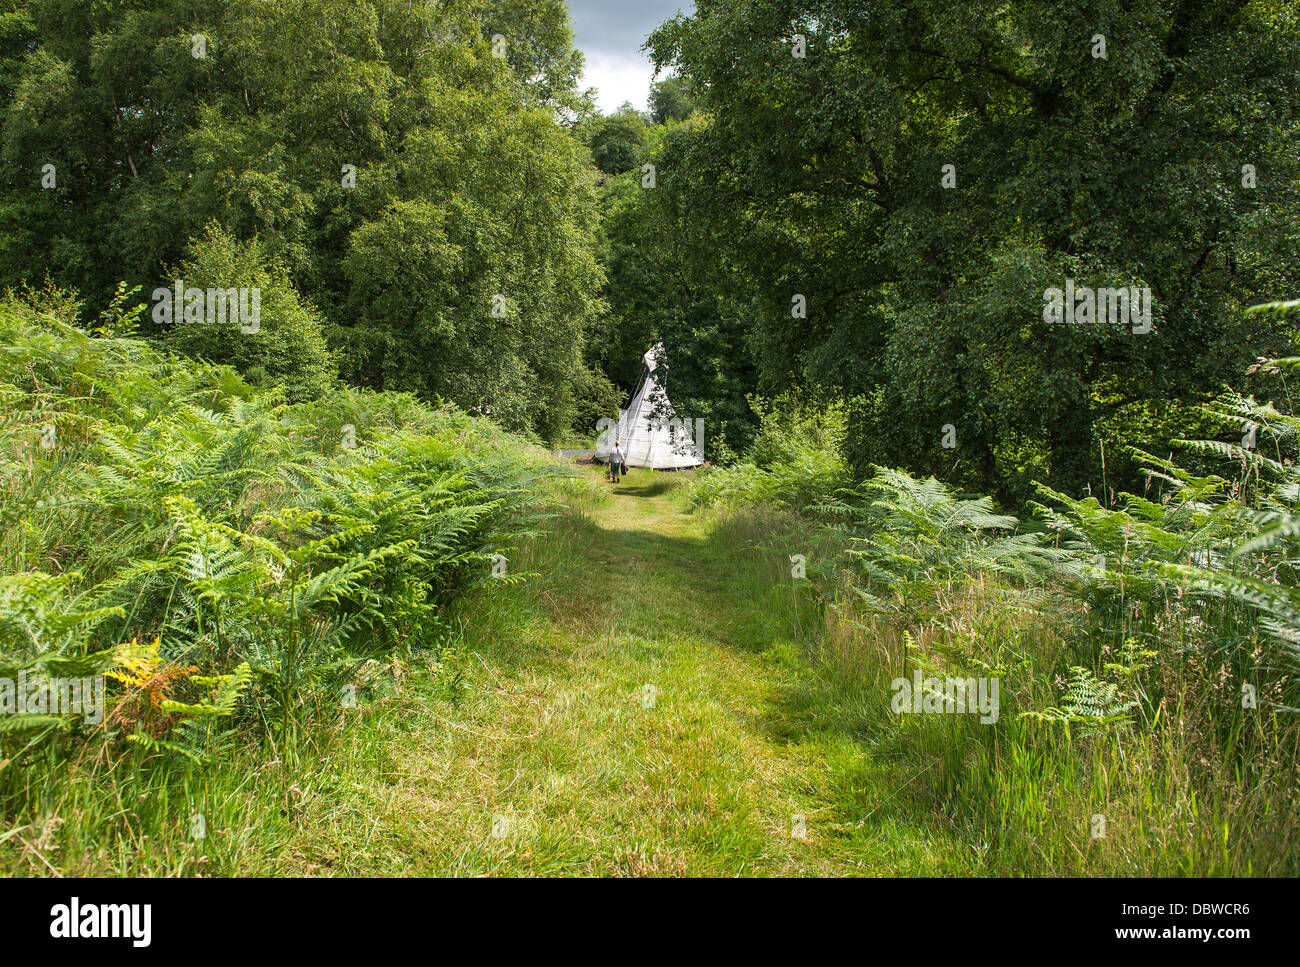 Tipi at the bottom of a grassy woodland hill Stock Photo